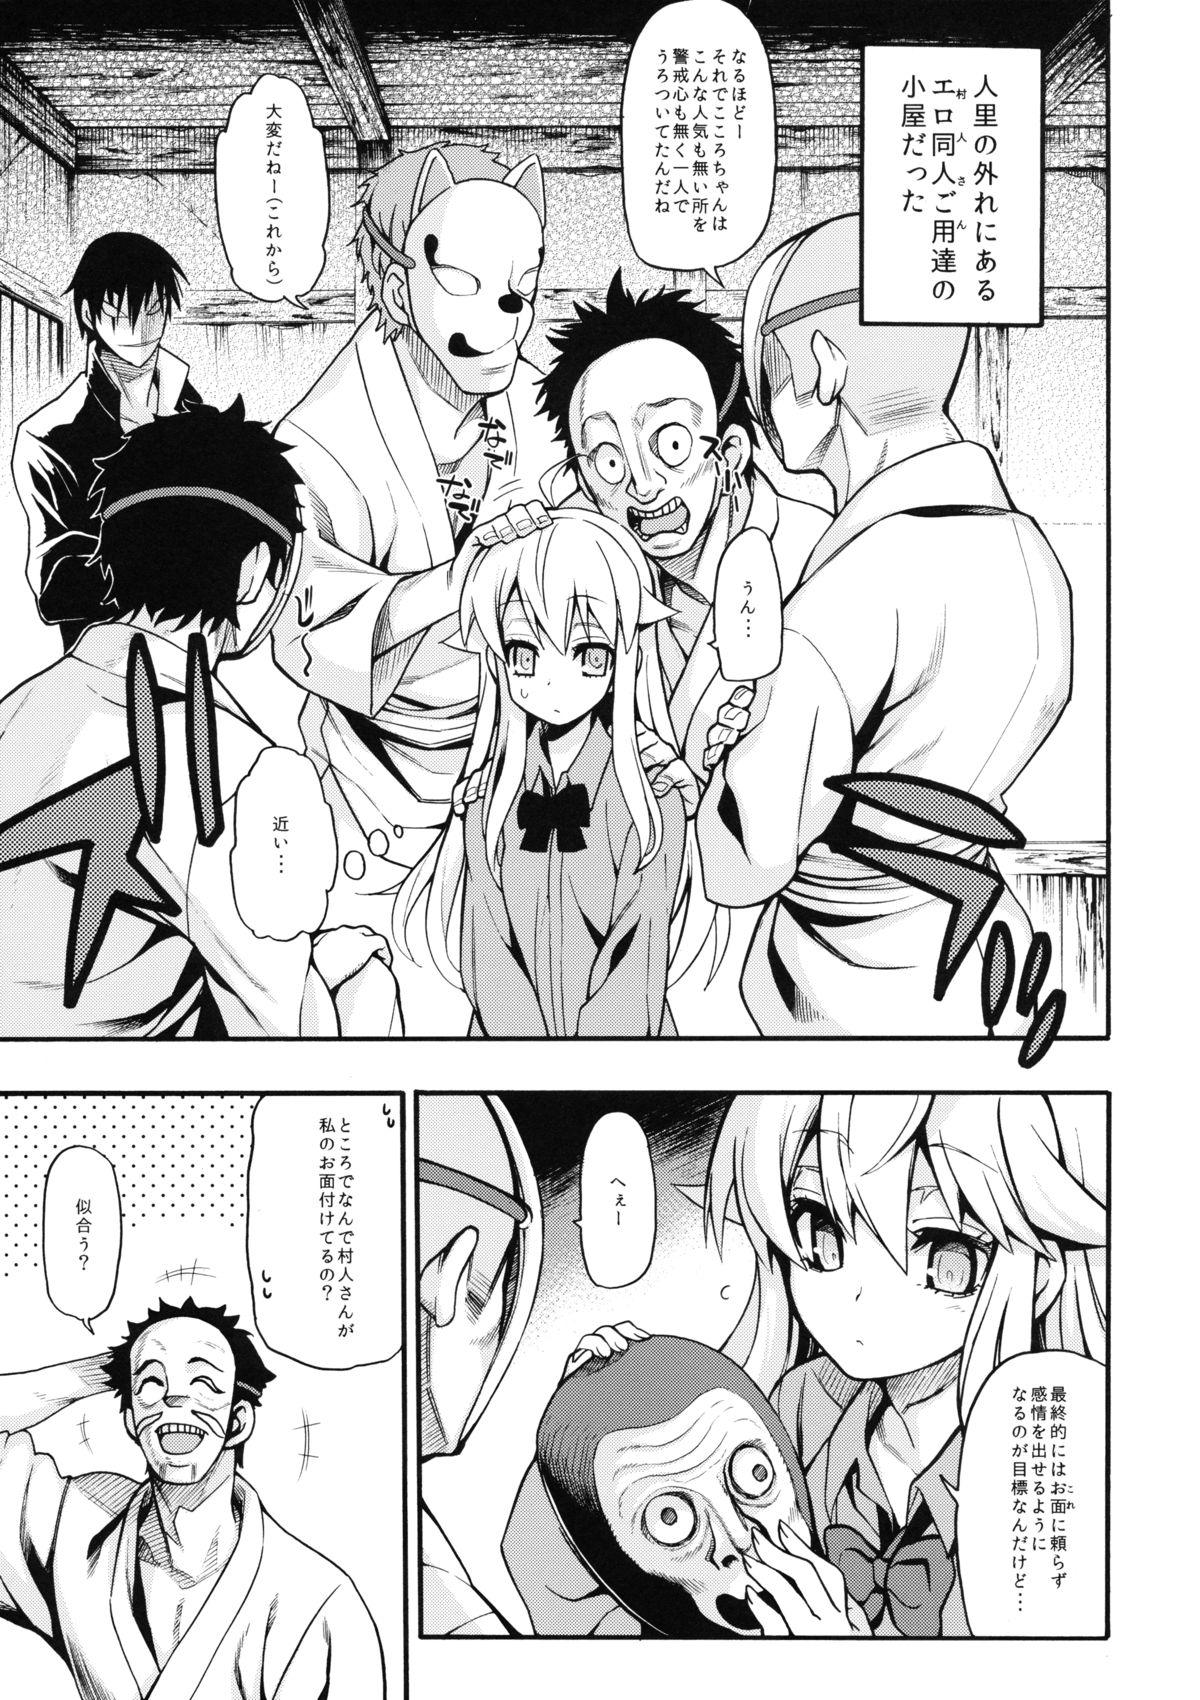 Ex Gf Hata no Kokoro Connect. - Touhou project Longhair - Page 4